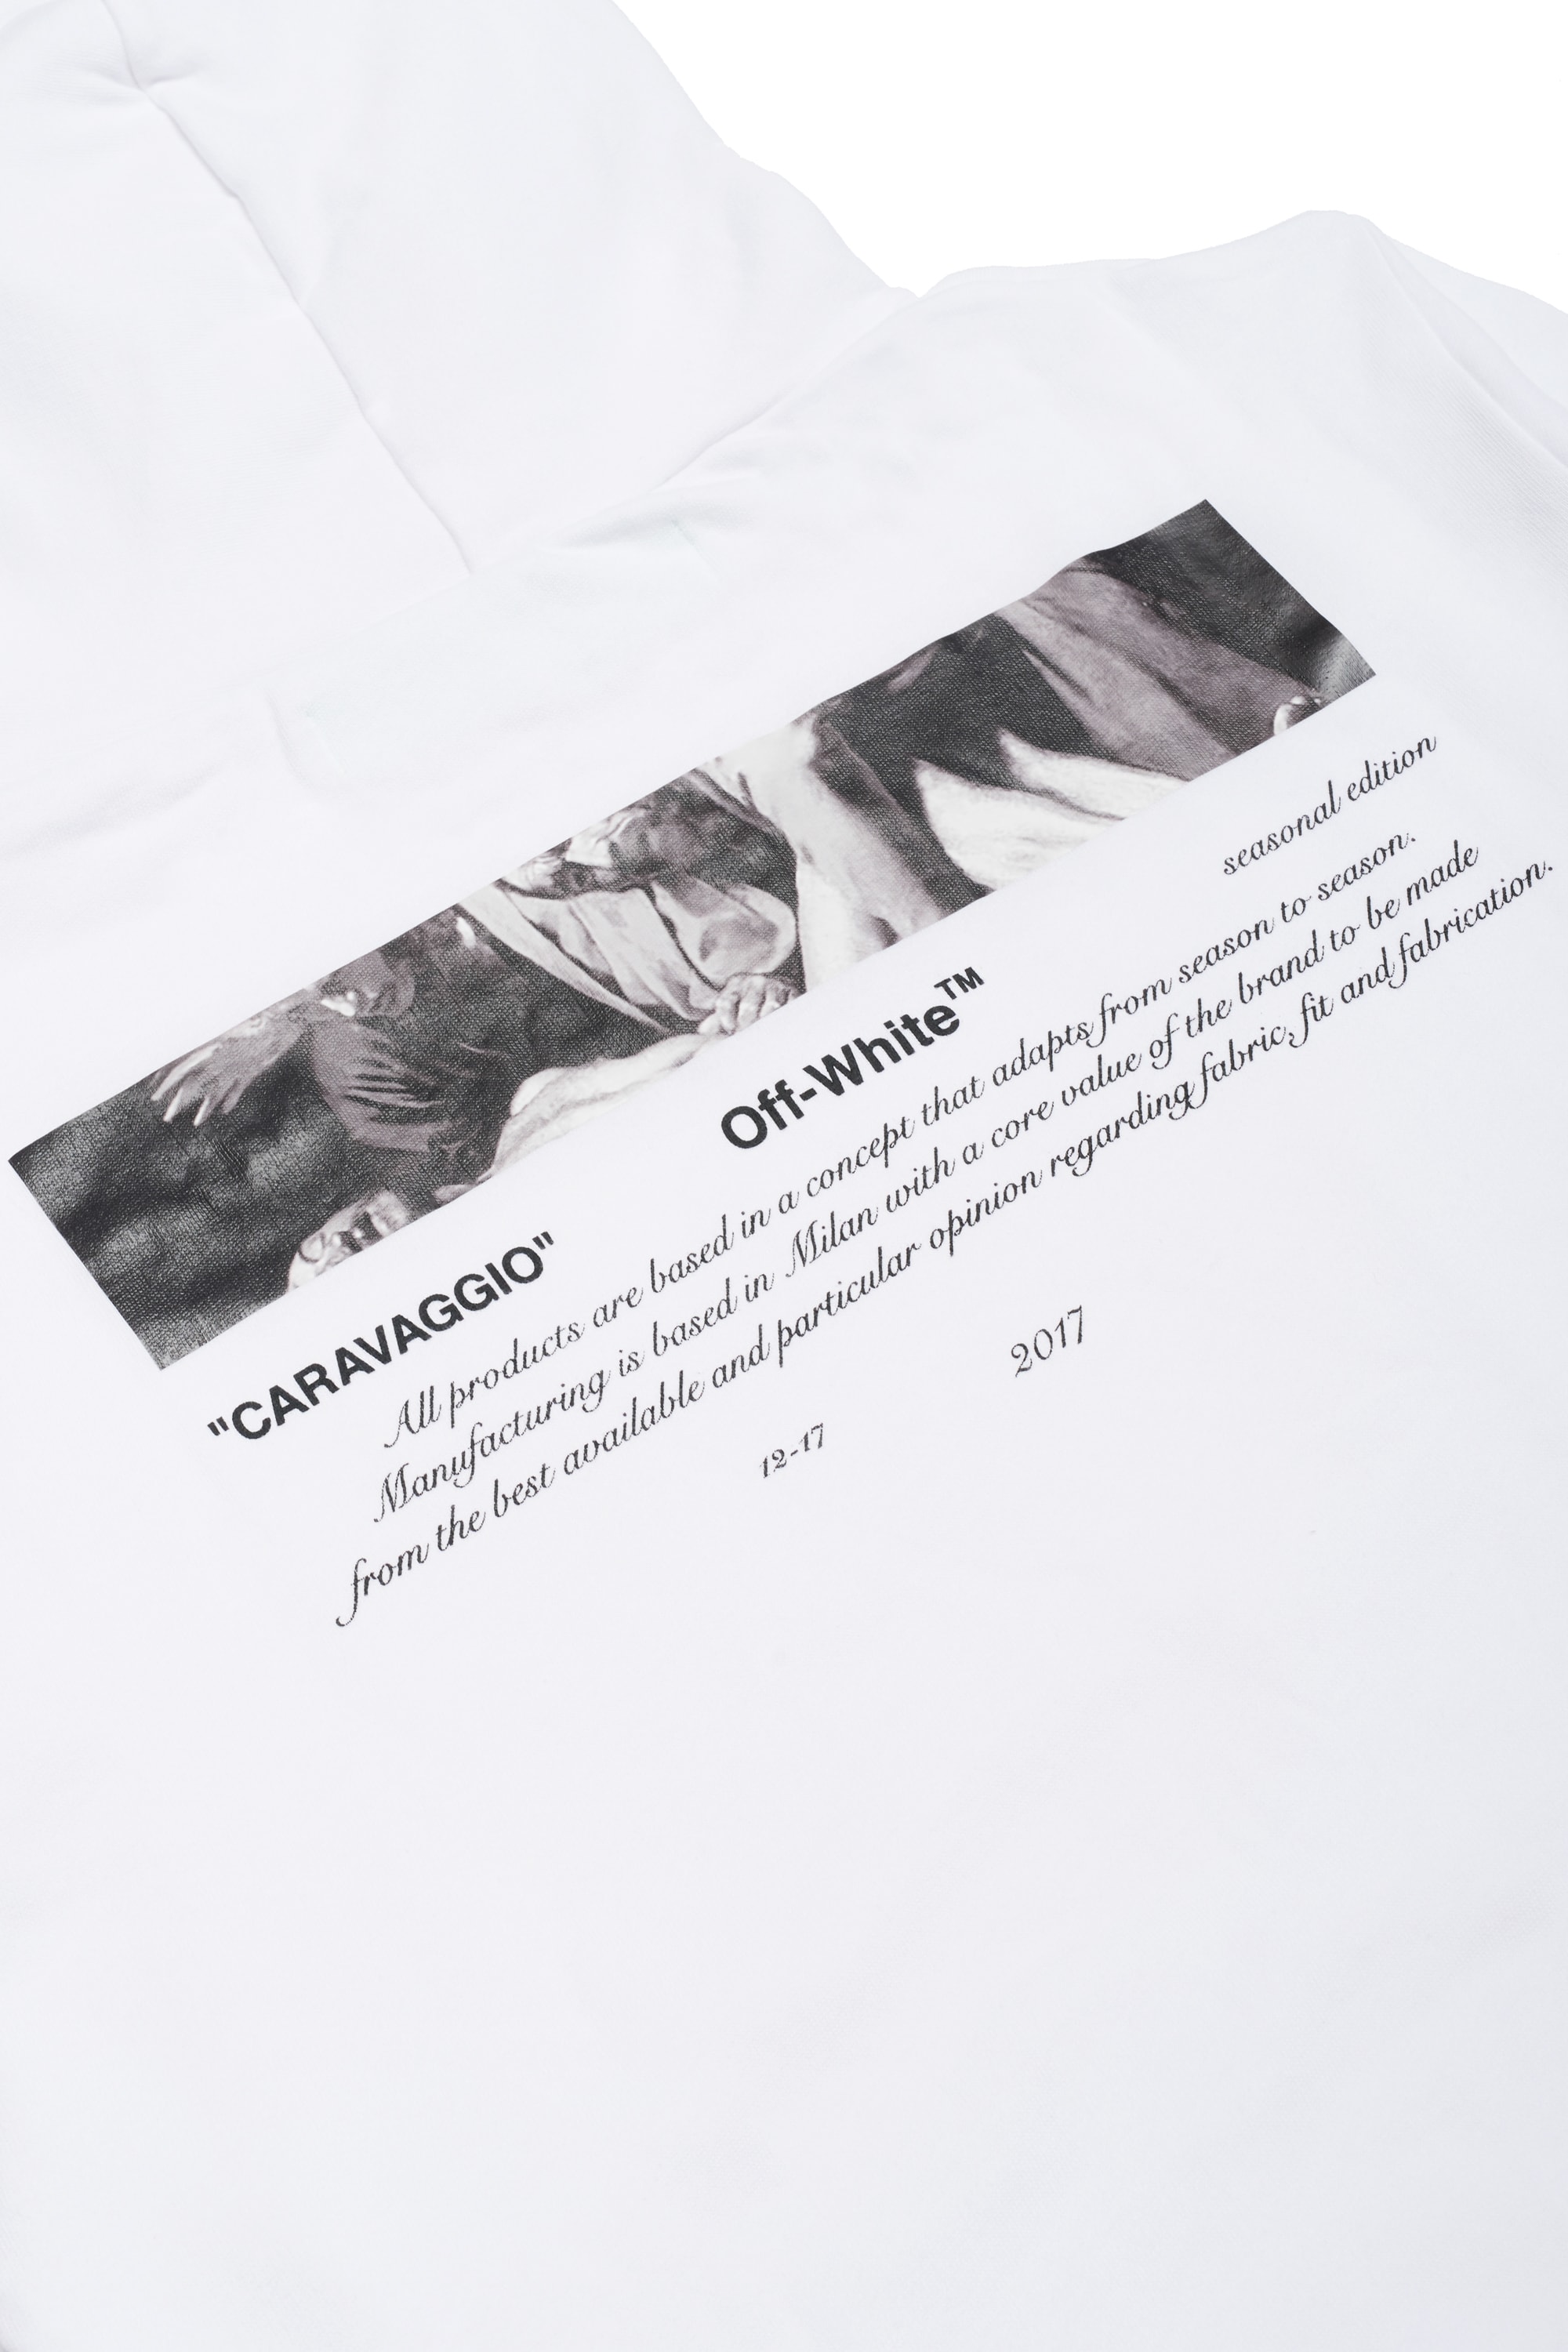 OFF-WHITE's Latest Capsule Collection Is Catered “FOR ALL” - MASSES